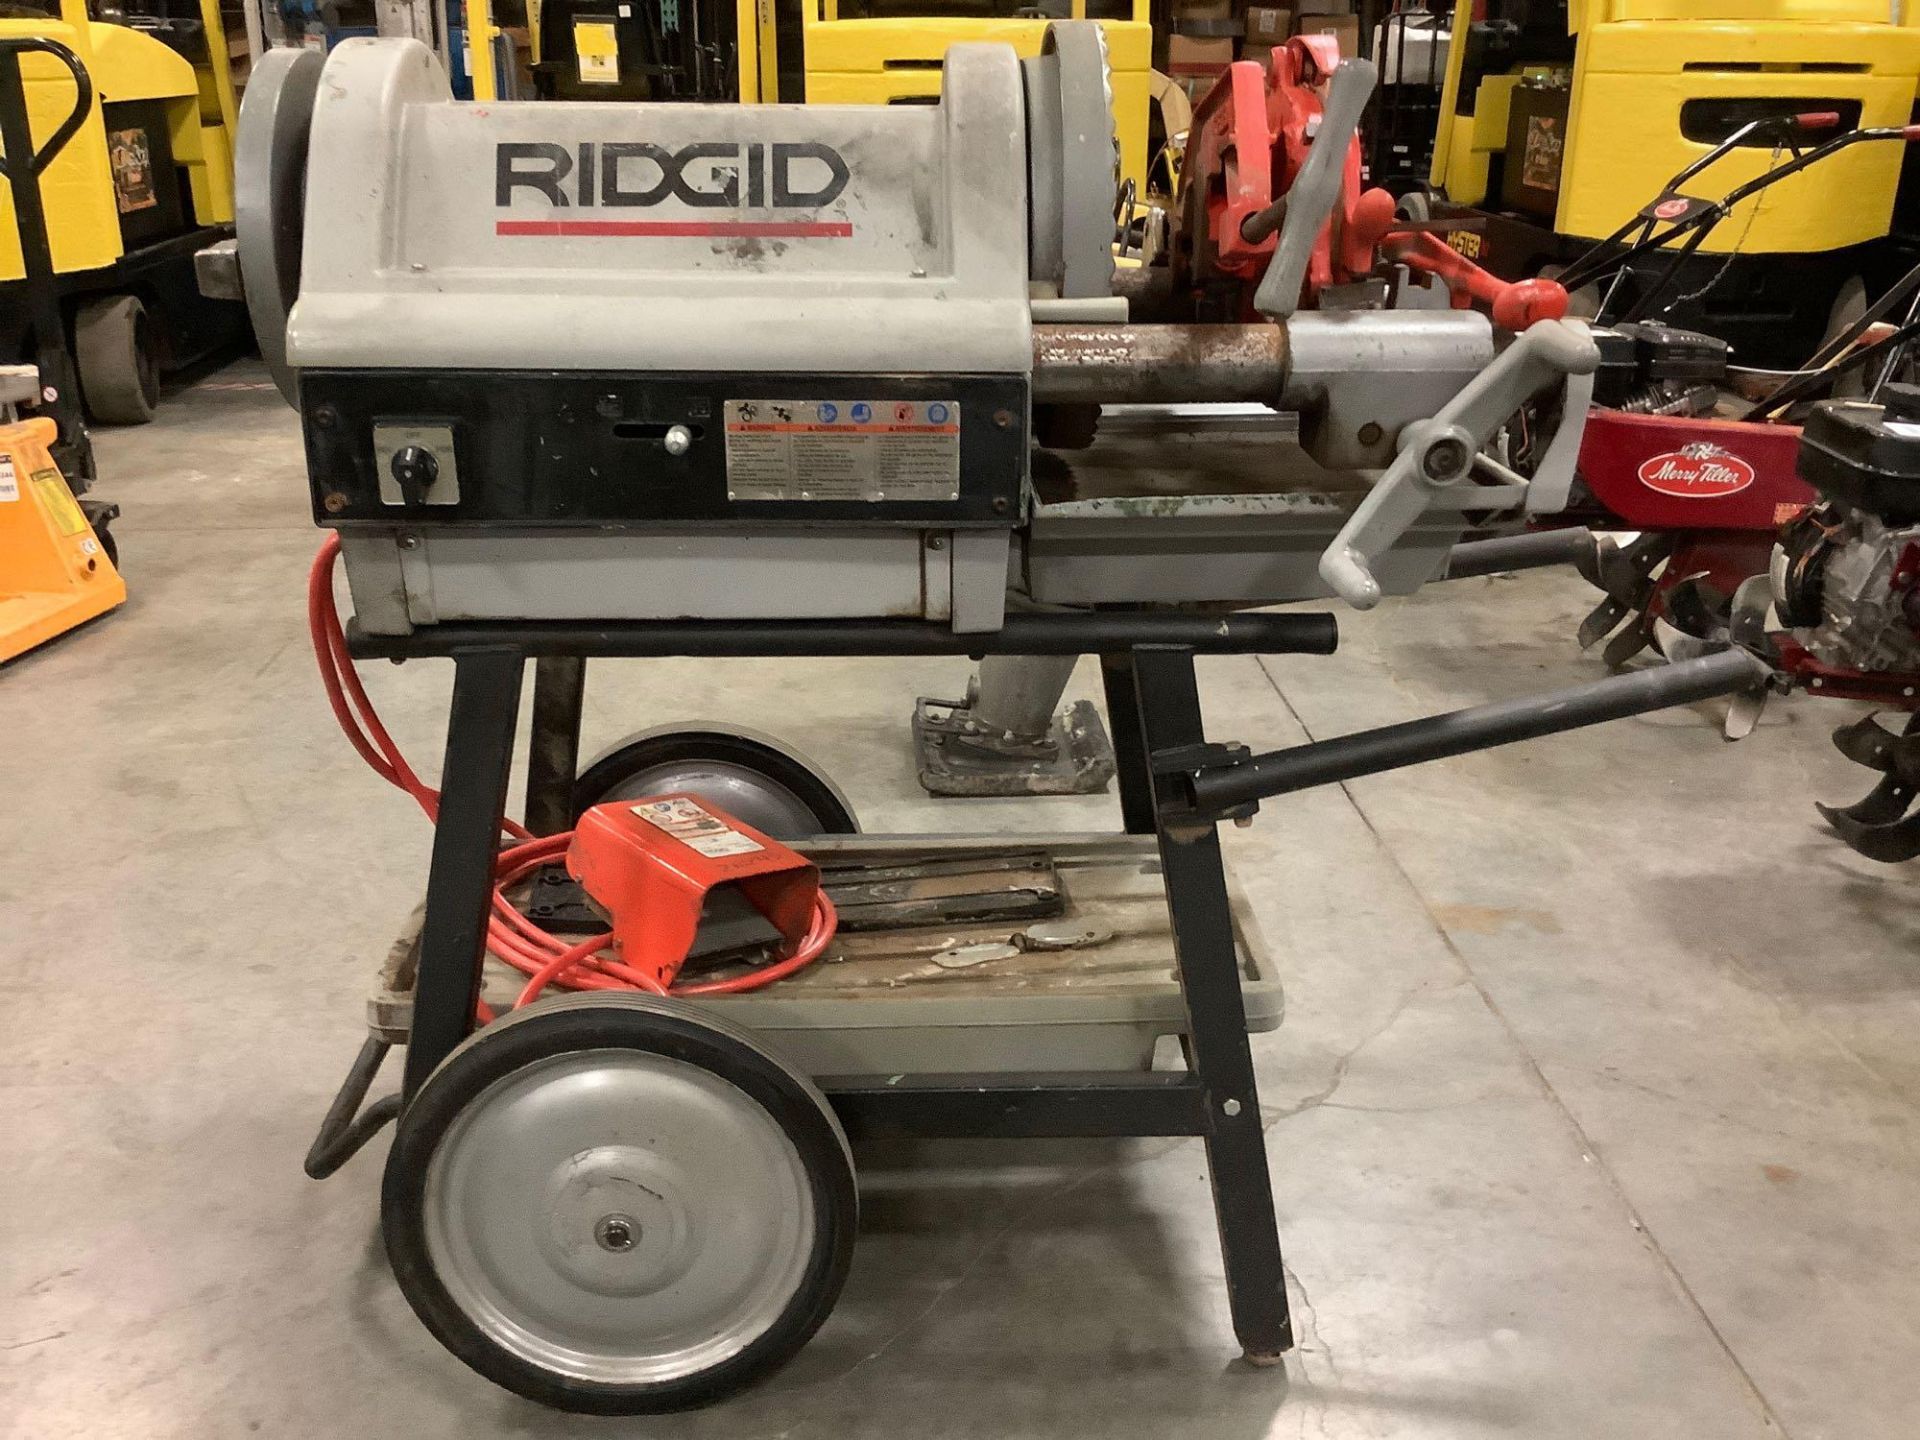 2018 ELECTRIC RIDGID PIPE THREADER MODEL 1224 WITH STAND, APPROX 120 VOLTS,APPROX AMP 15,APPROX HZ 6 - Image 9 of 11